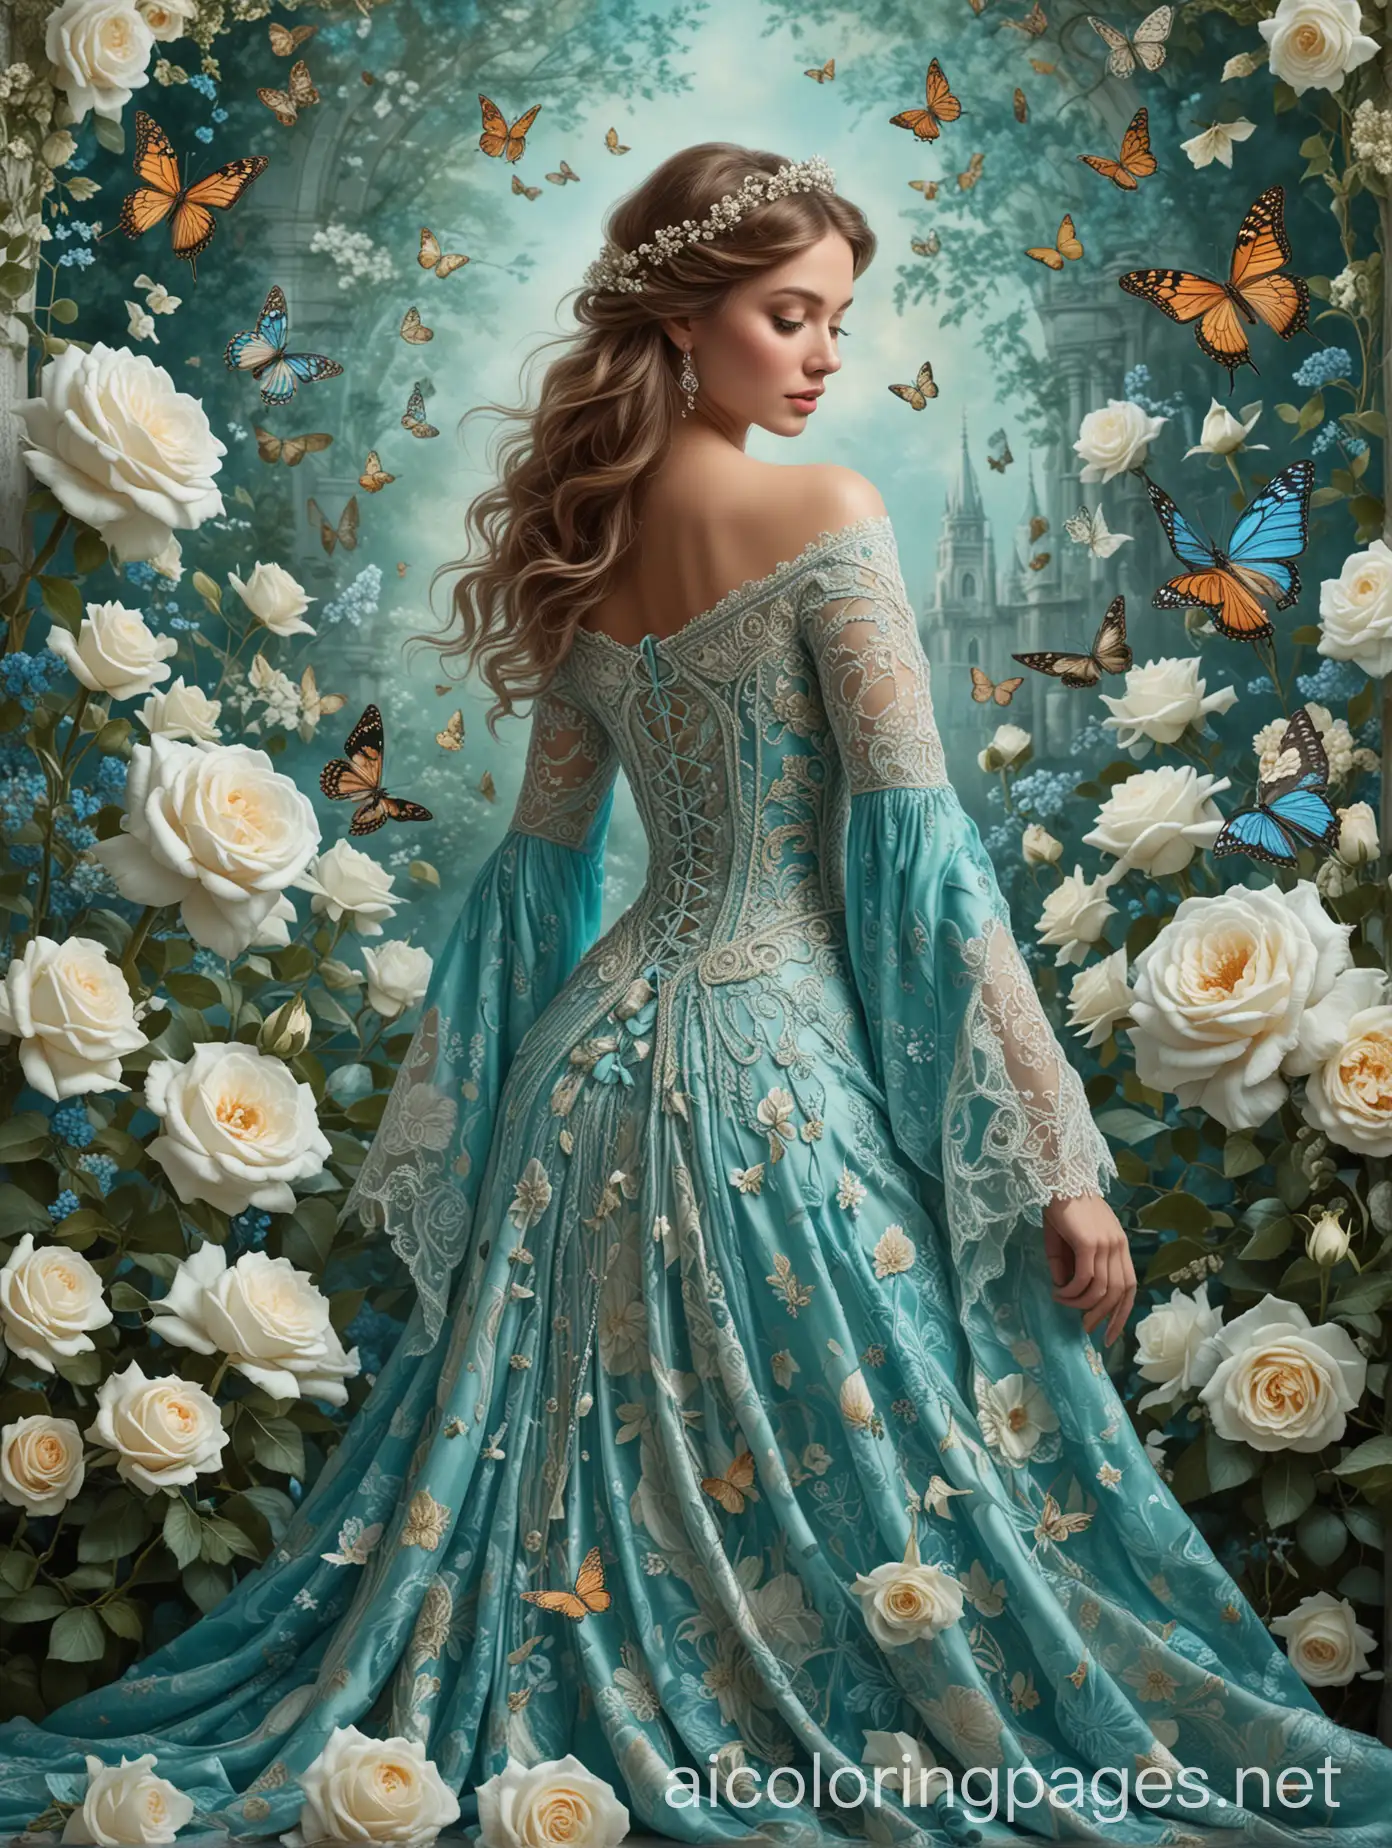 This is an intricate and artistic image featuring a woman in a flowing, ornate turquoise dress adorned with floral patterns and lace. She is surrounded by large, beautifully detailed turquoise and white roses, as well as delicate butterflies that appear to be fluttering around her. The composition gives a dreamy, elegant, and whimsical feel, reminiscent of a fairy tale or fantasy scene. The woman’s pose, the detailed textures of the dress, and the harmonious color palette all contribute to the captivating aesthetic of the artwork., Coloring Page, black and white, line art, white background, Simplicity, Ample White Space. The background of the coloring page is plain white to make it easy for young children to color within the lines. The outlines of all the subjects are easy to distinguish, making it simple for kids to color without too much difficulty